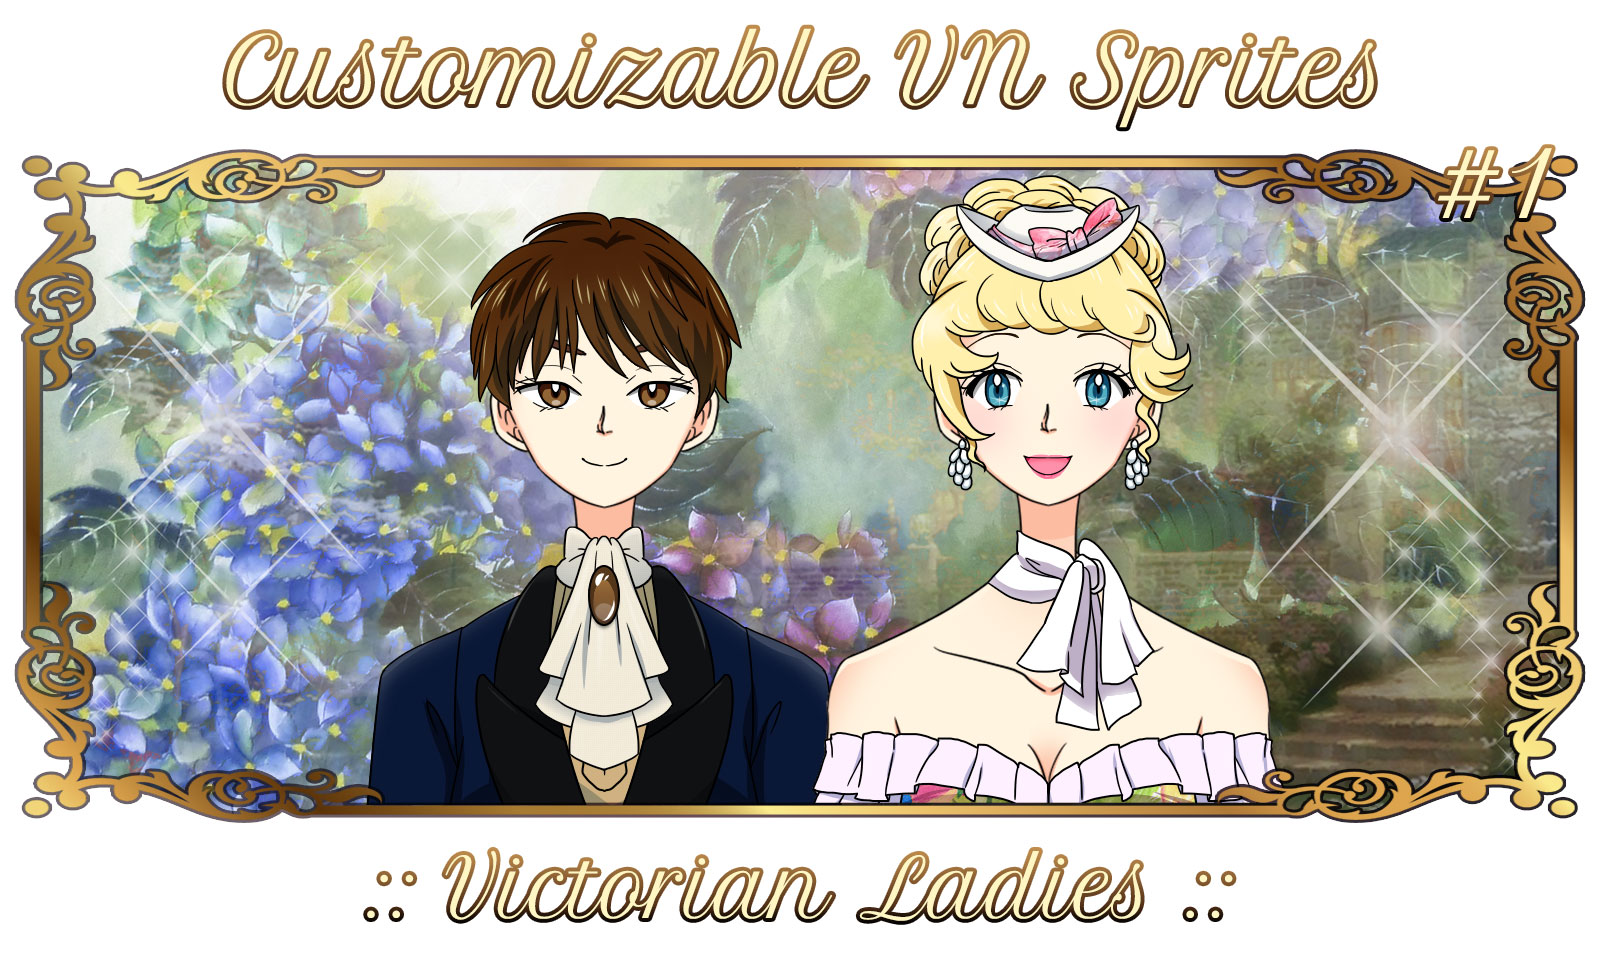 Character Pack: Customizable Victorian Anime Girl Portraits